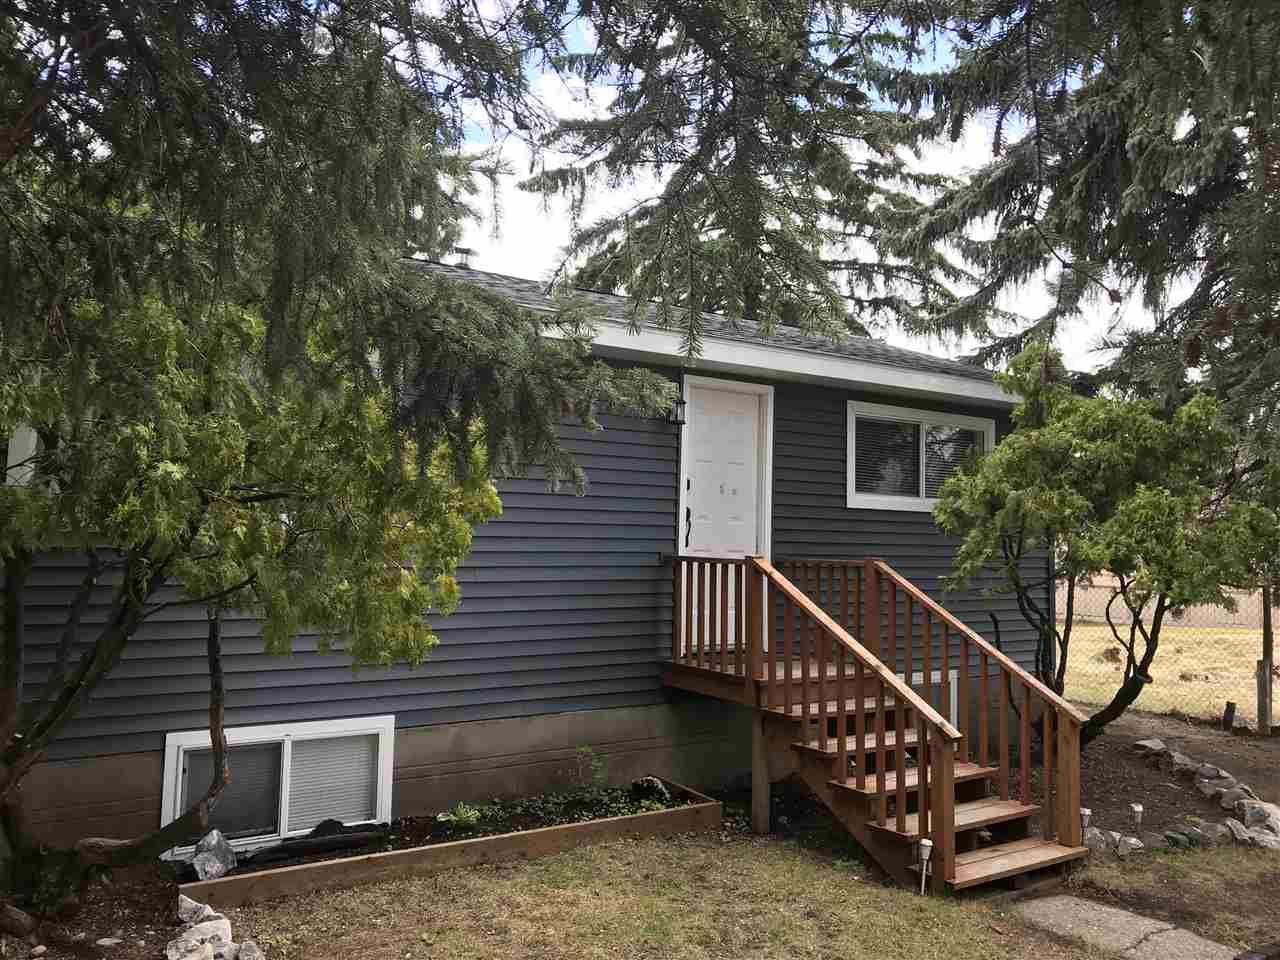 Main Photo: 1626 TAMARACK Street in Prince George: Van Bow House for sale (PG City Central (Zone 72))  : MLS®# R2291252